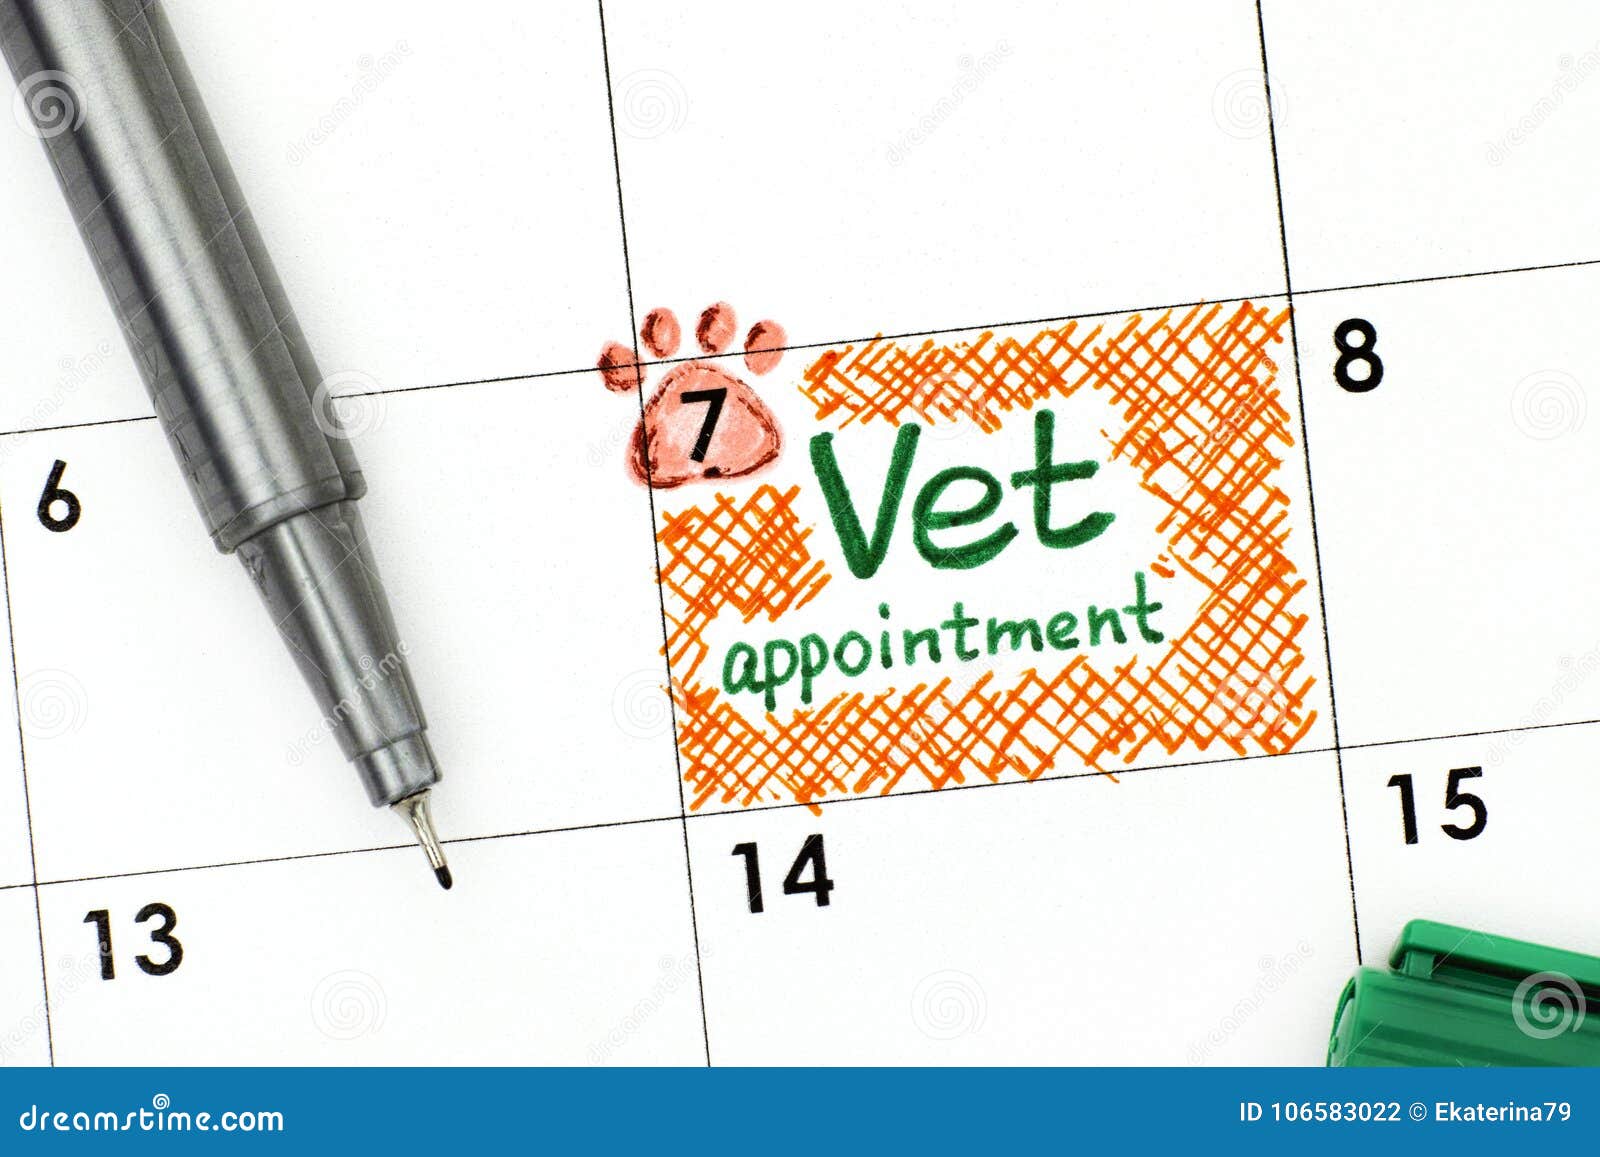 reminder vet appointment in calendar with green pen.